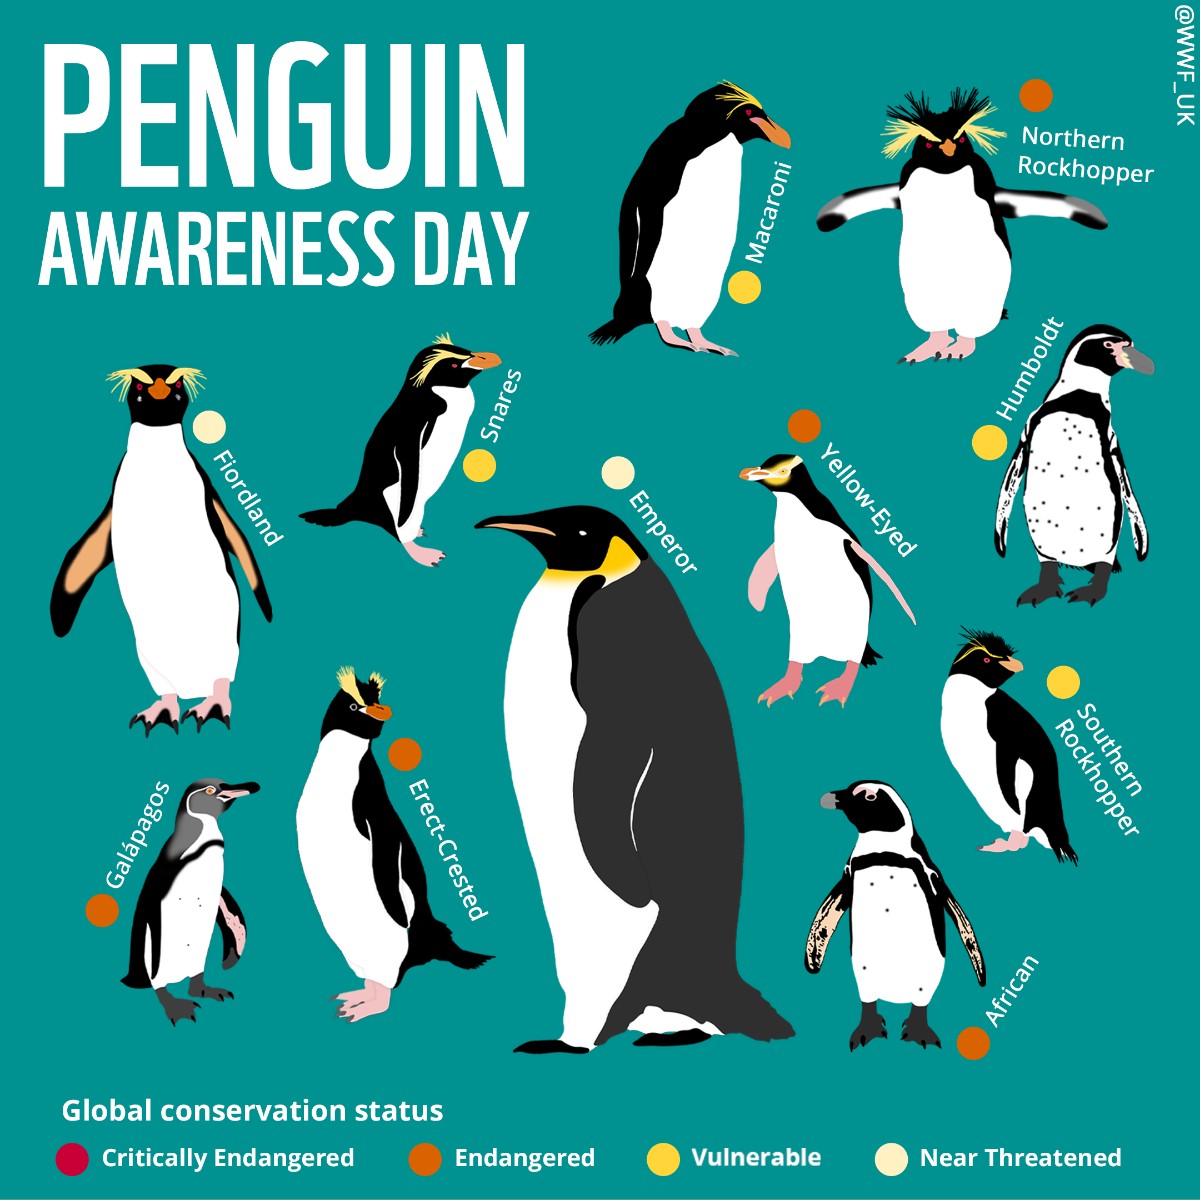 It’s #PenguinAwarenessDay and we’re celebrating some of these cool birds. 🐧❄️ #DYK that penguins are one of the most threatened groups of birds (not so cool)? From Near Threatened emperors to Endangered Galapagos, discover their conservation status below. 👇😯